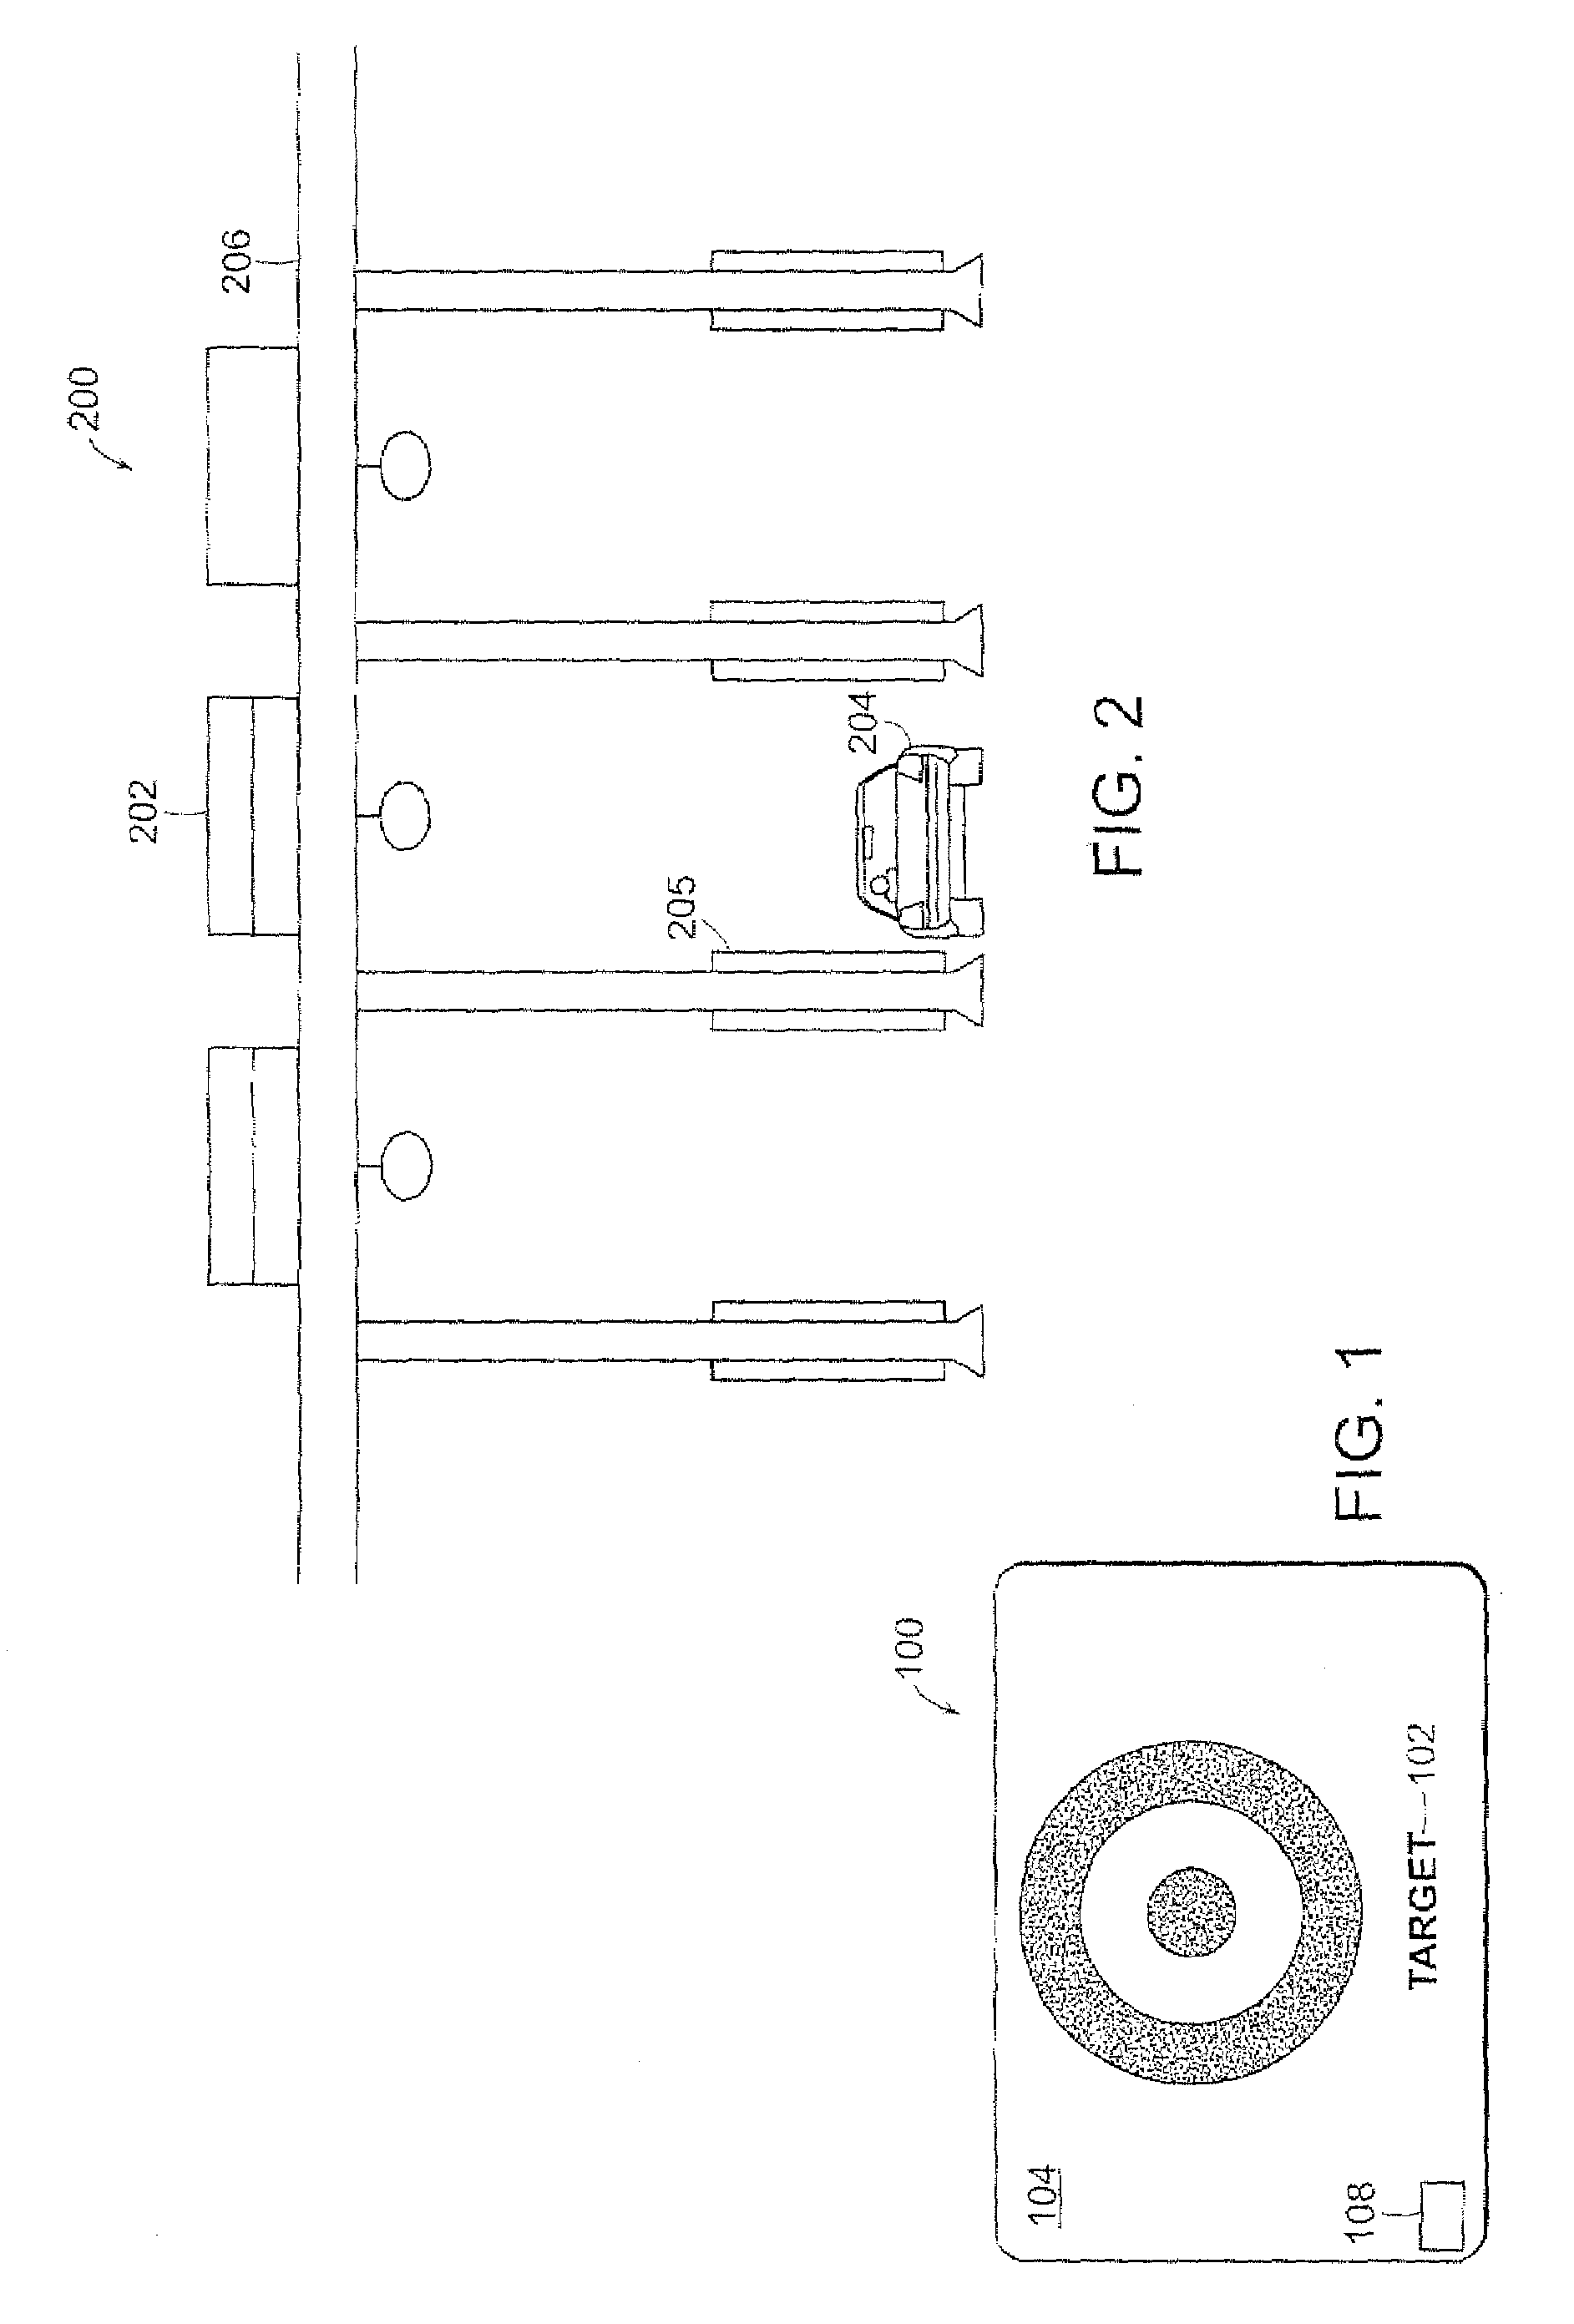 System and Method for Vehicle Advertising Network